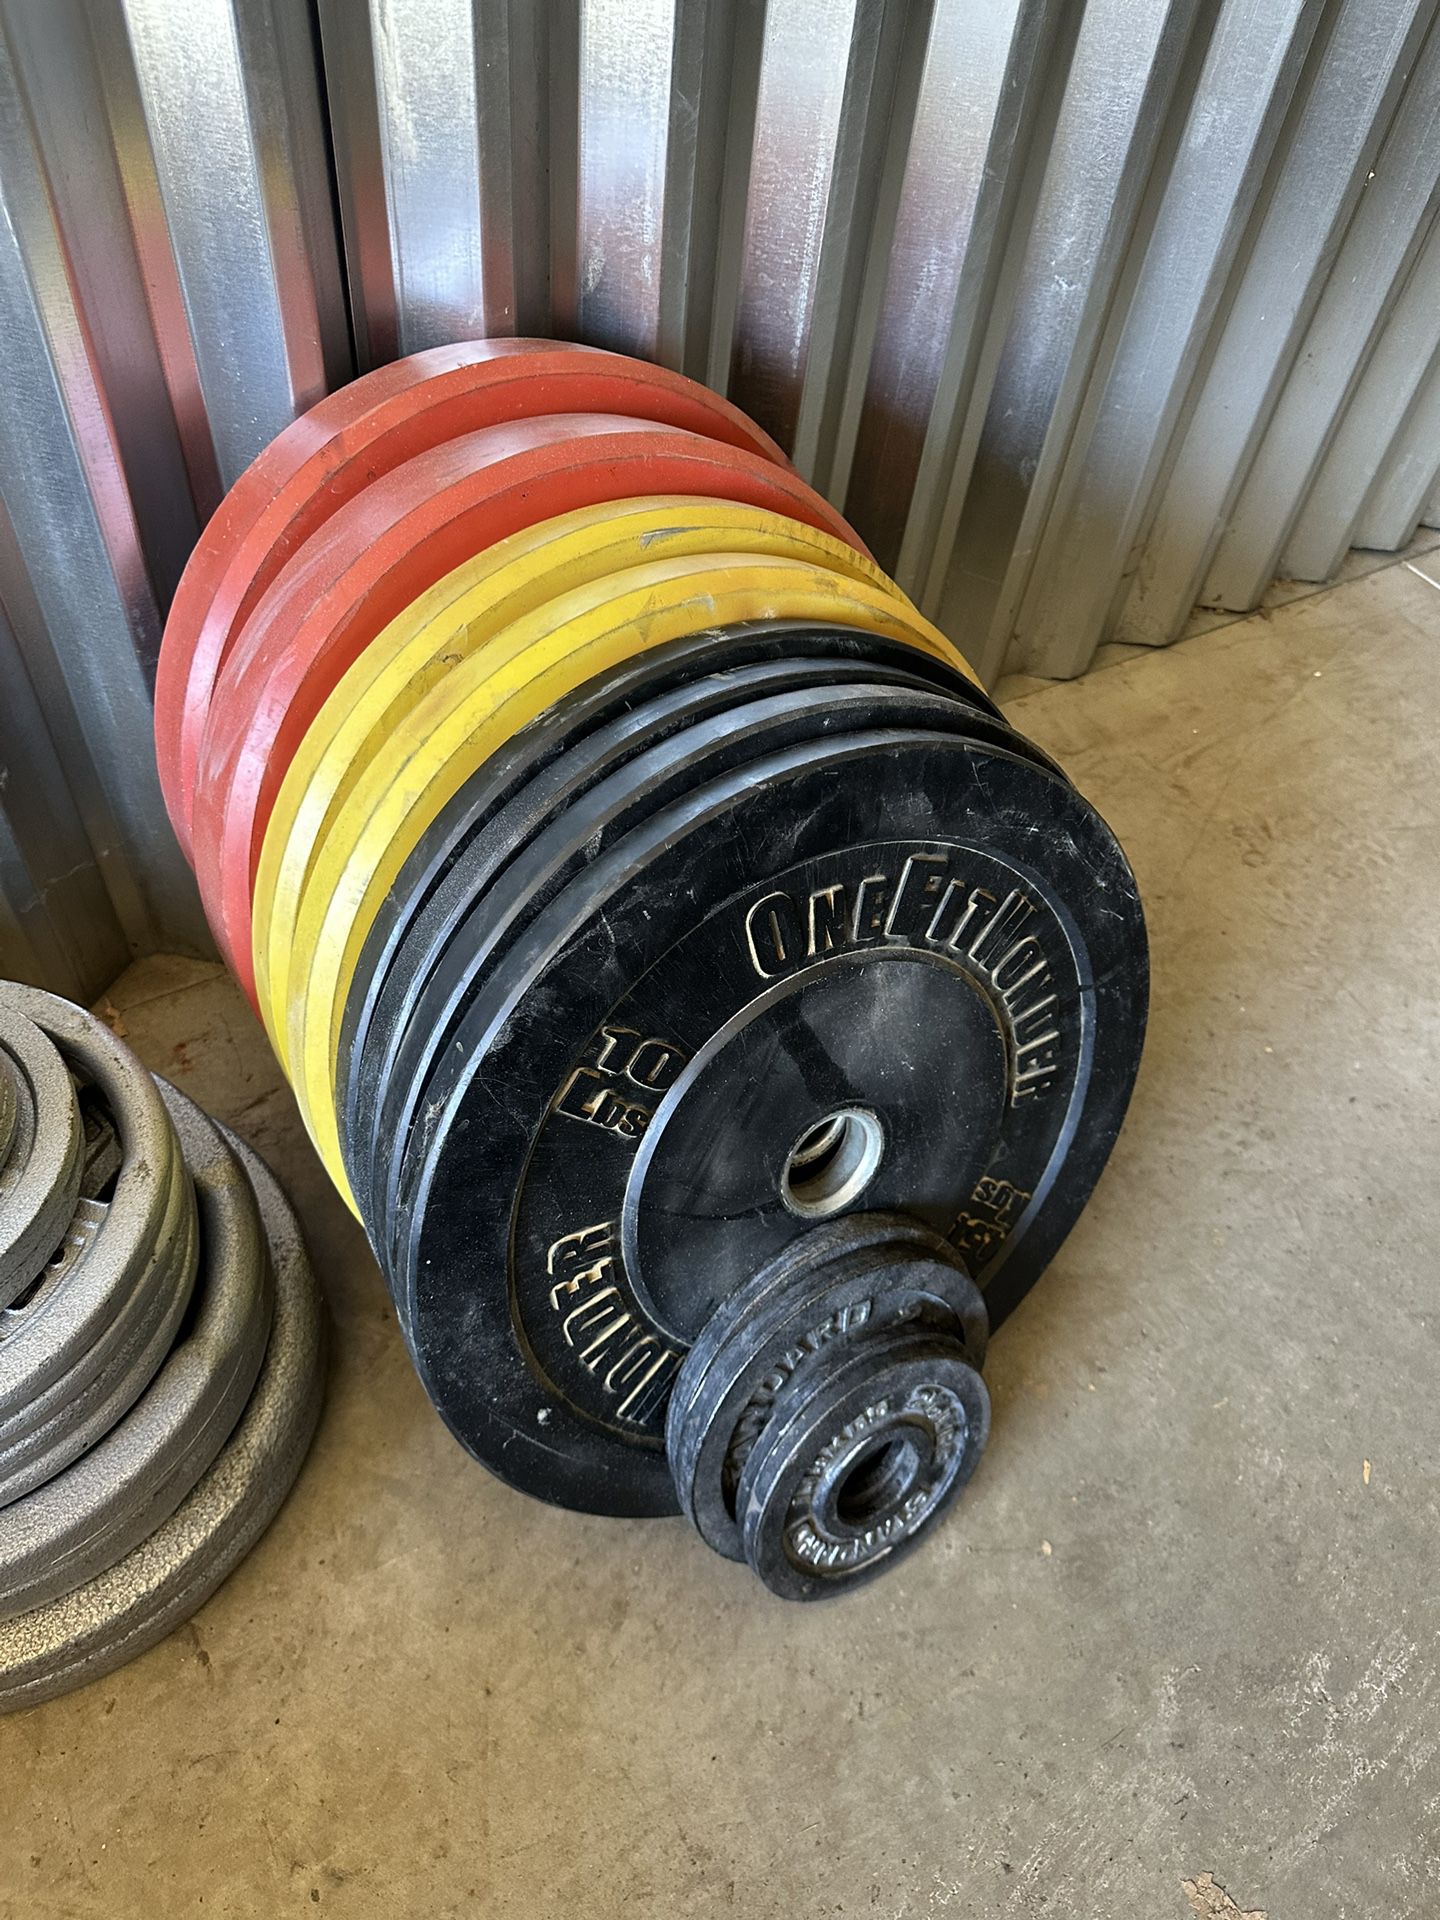 195lb rubber bumper Olympic weight set- one fit wonder